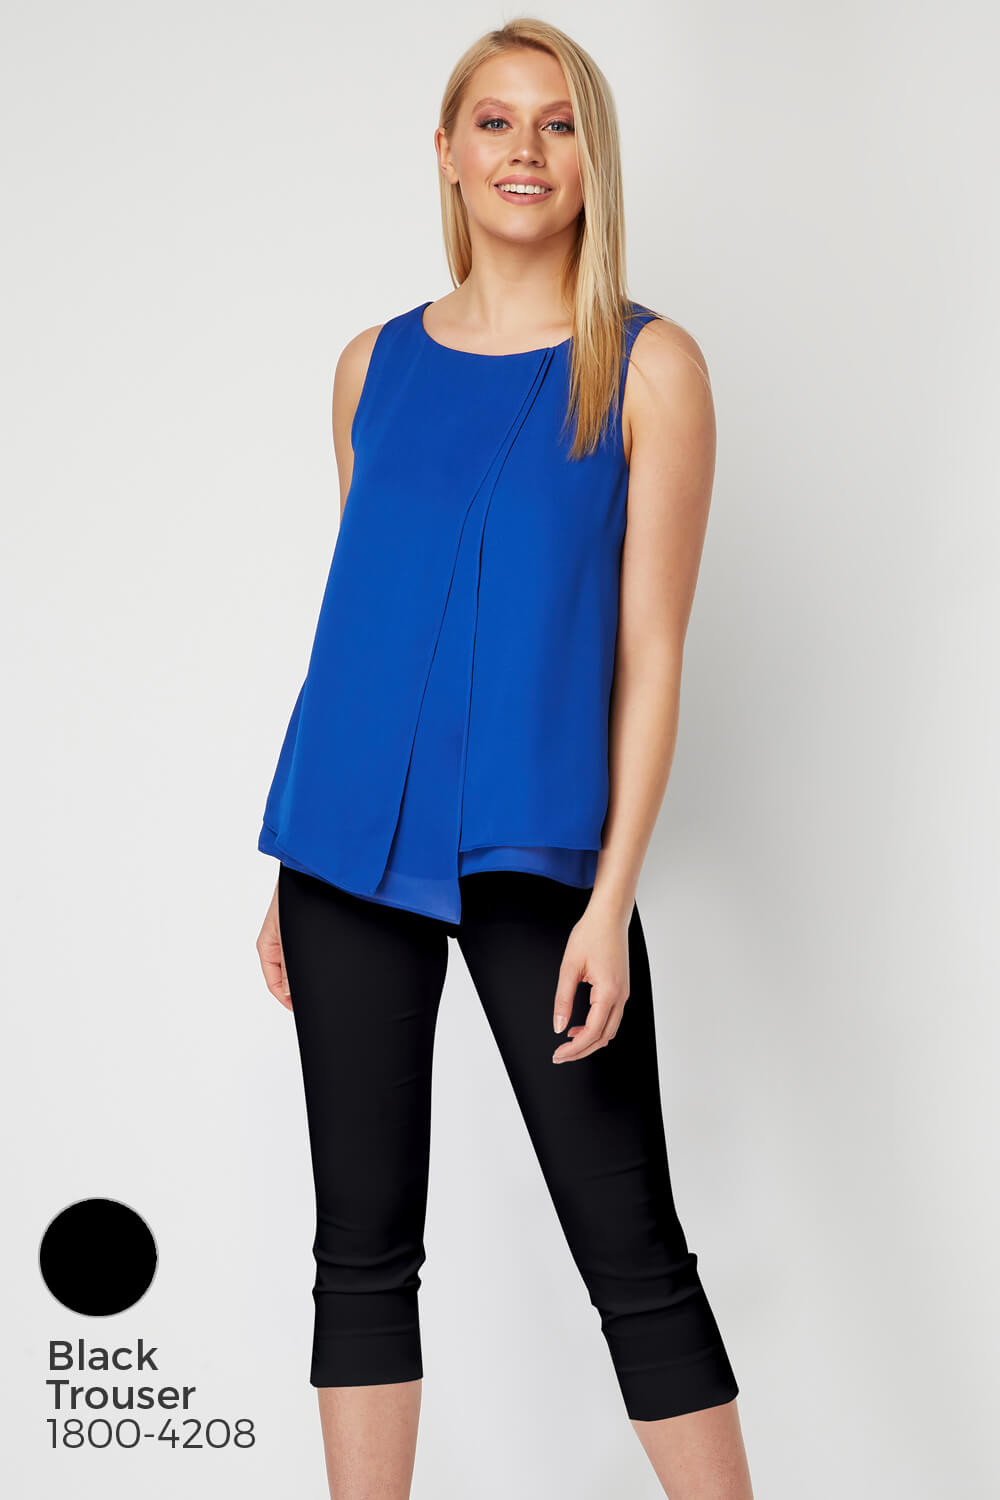 Royal Blue Double Layer Chiffon Top, Image 8 of 8